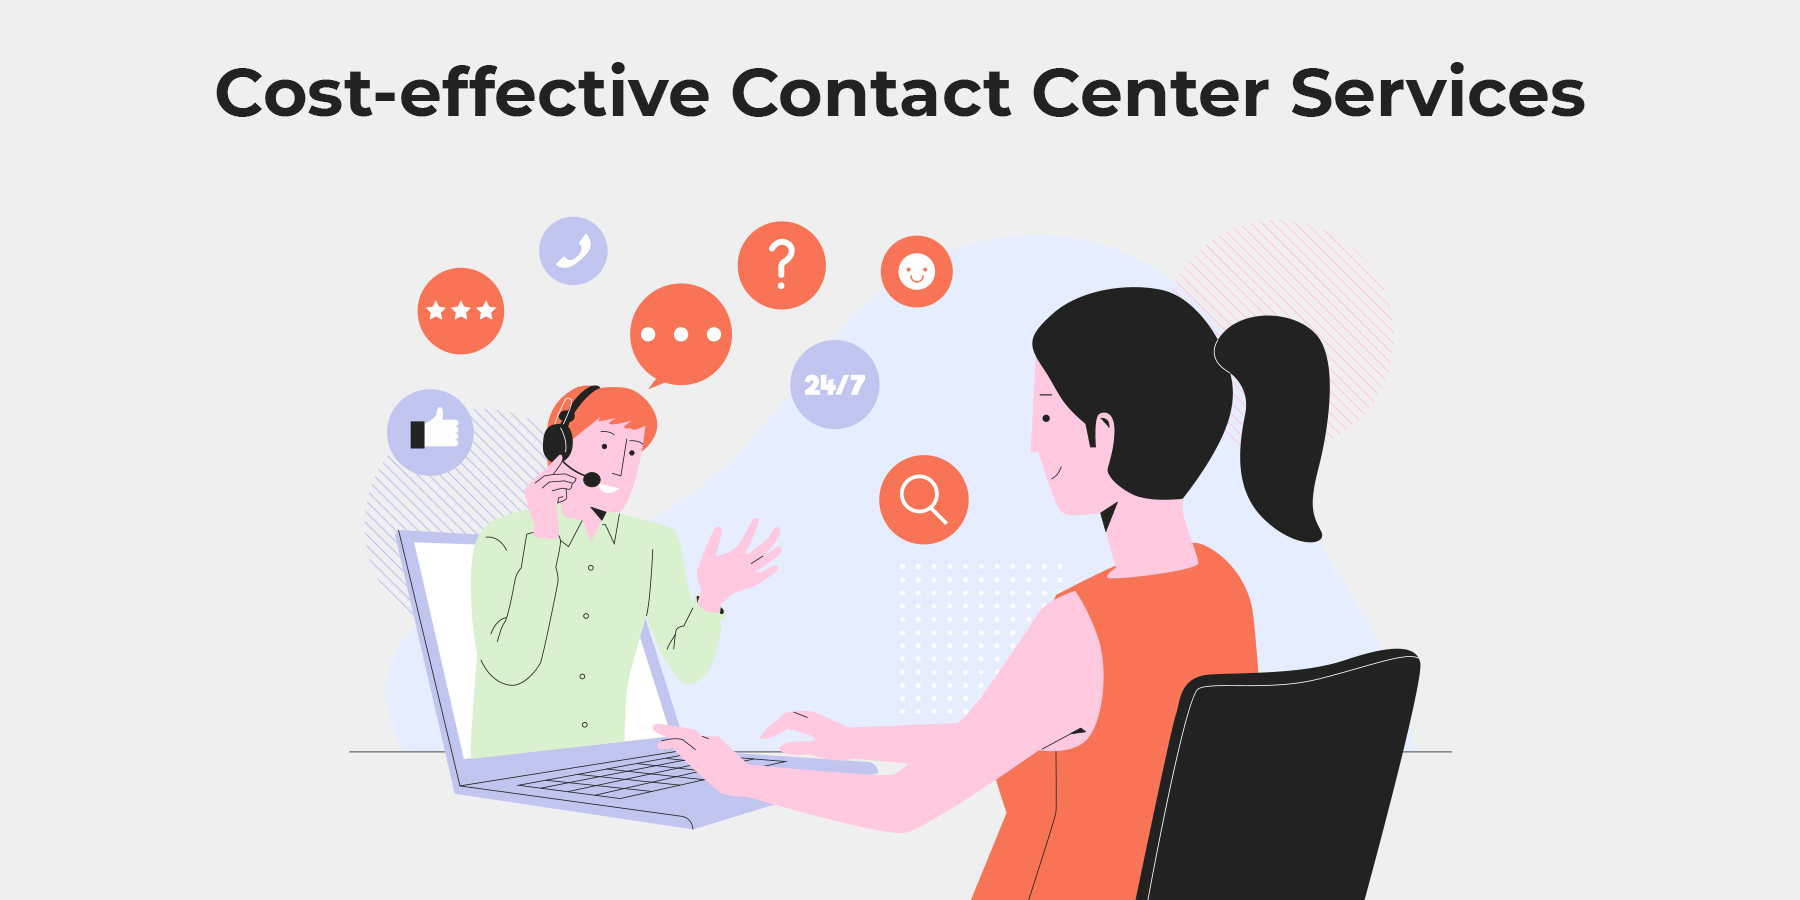 How outsourcing contact center services can help your business grow in a cost-effective way